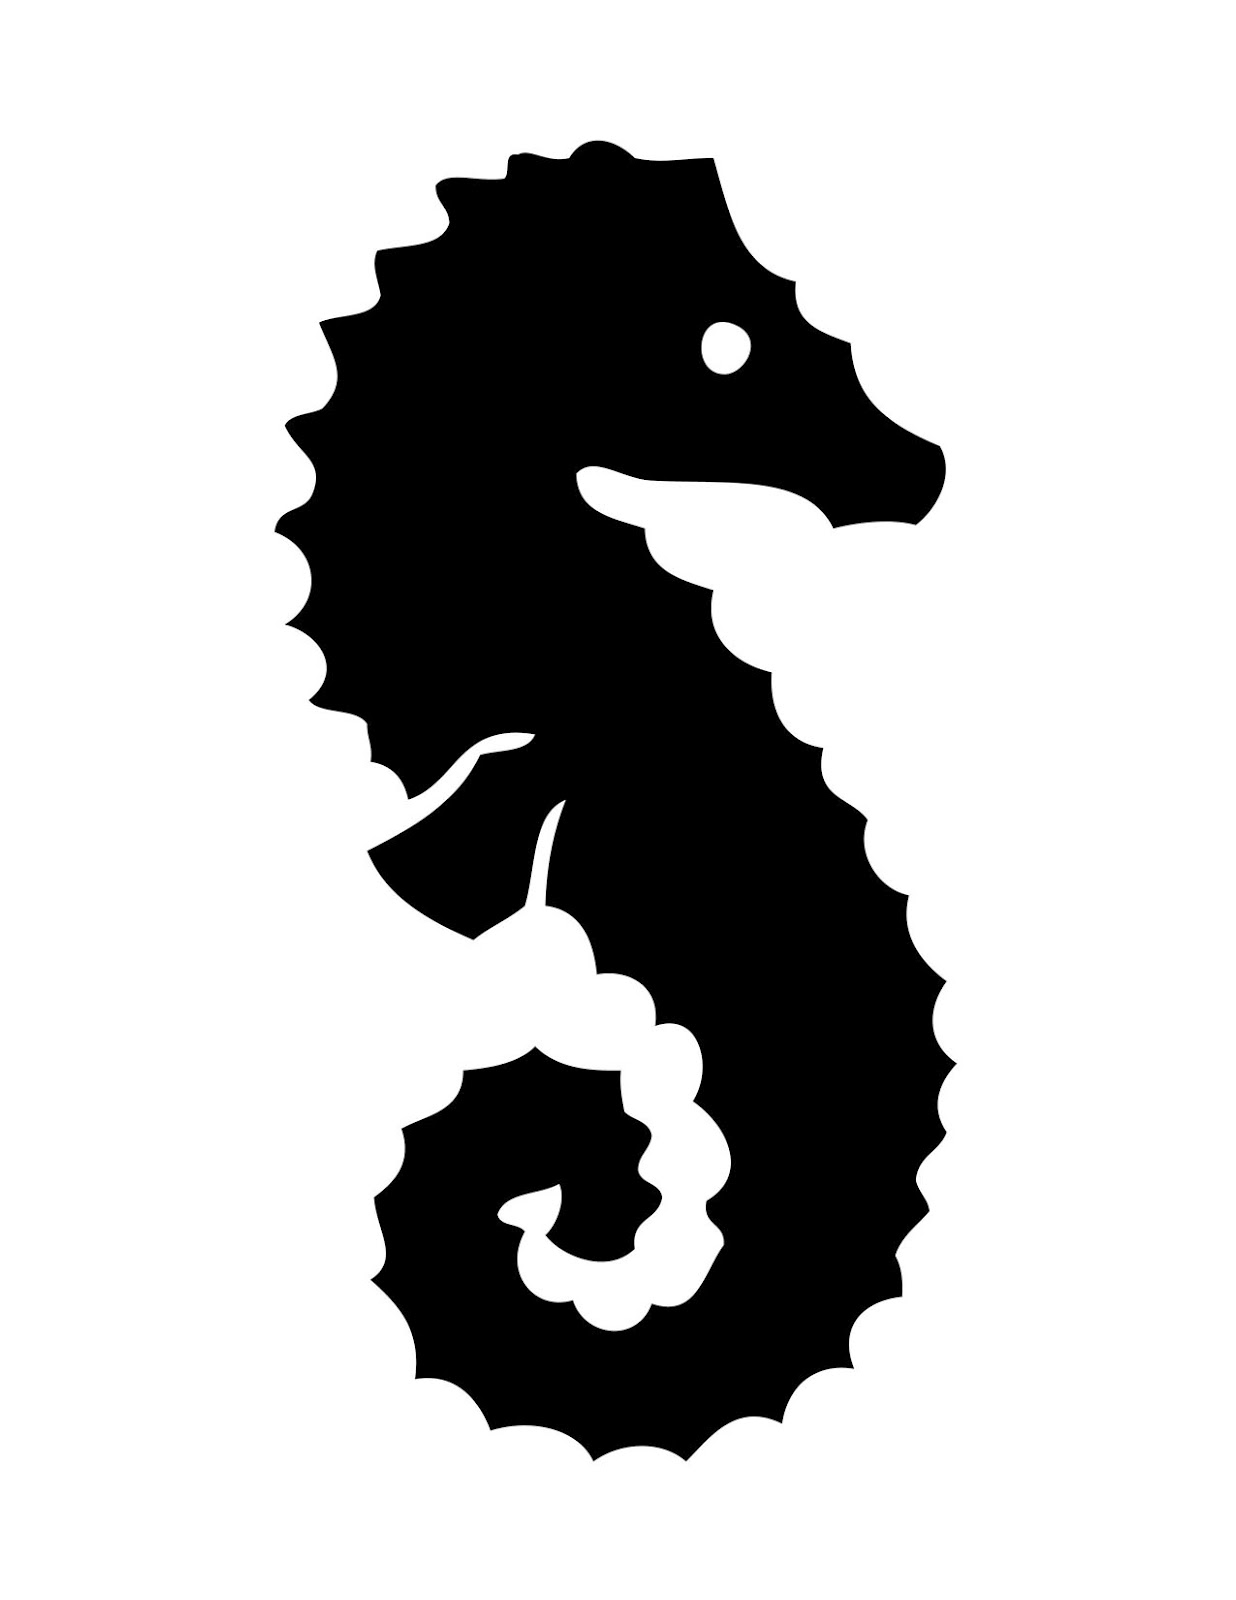 Transfer Printable - Seahorse Silhouettes - The Graphics Fairy